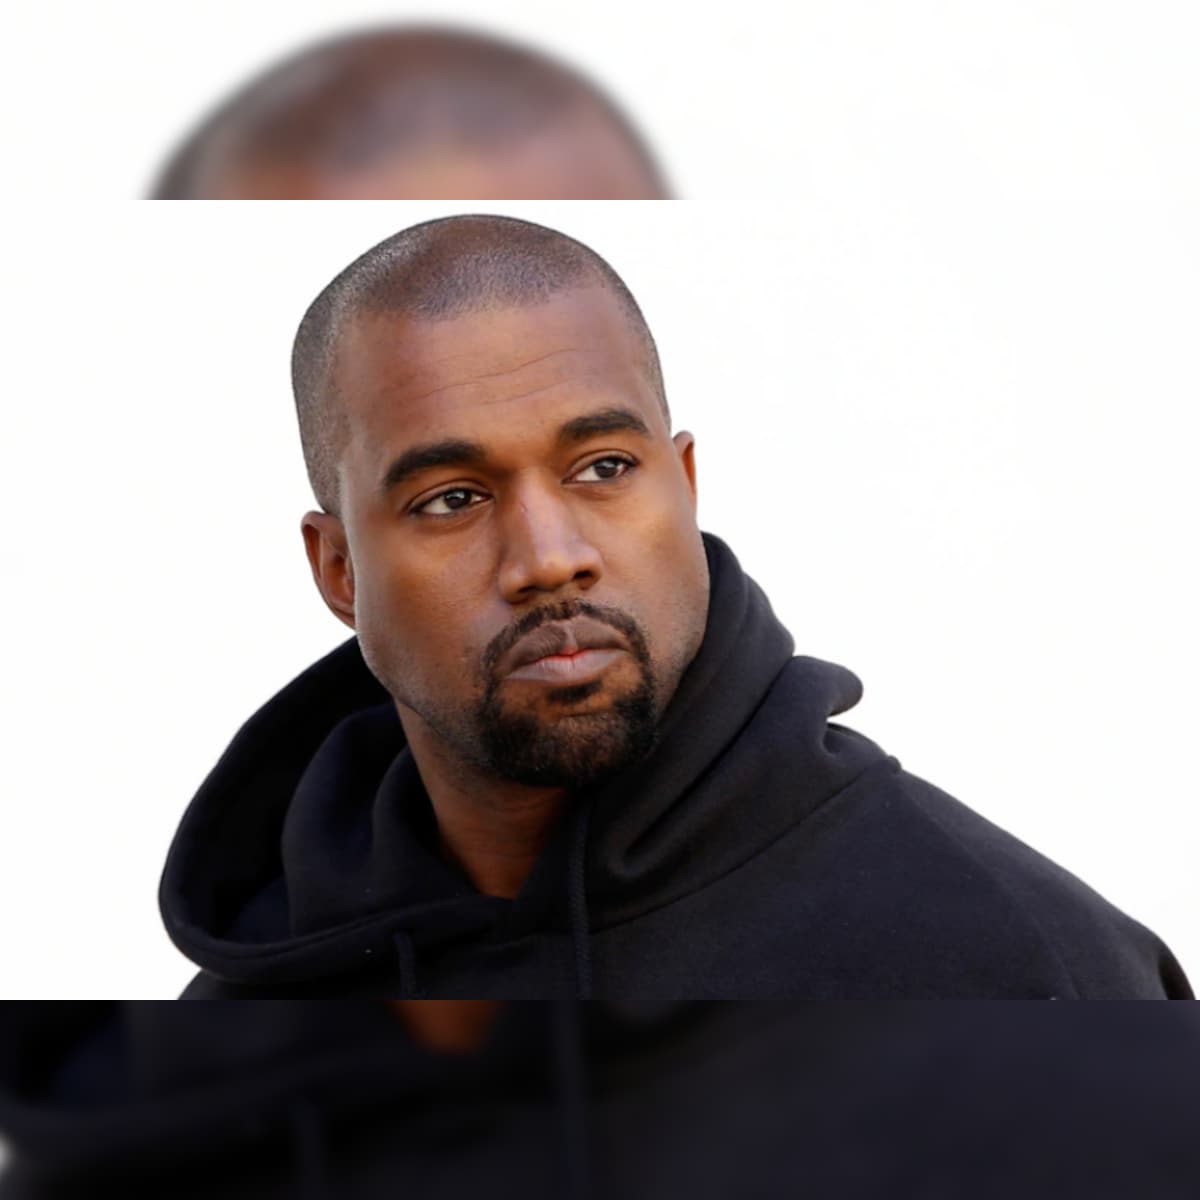 Kanye West With His Hands Up Wallpapers